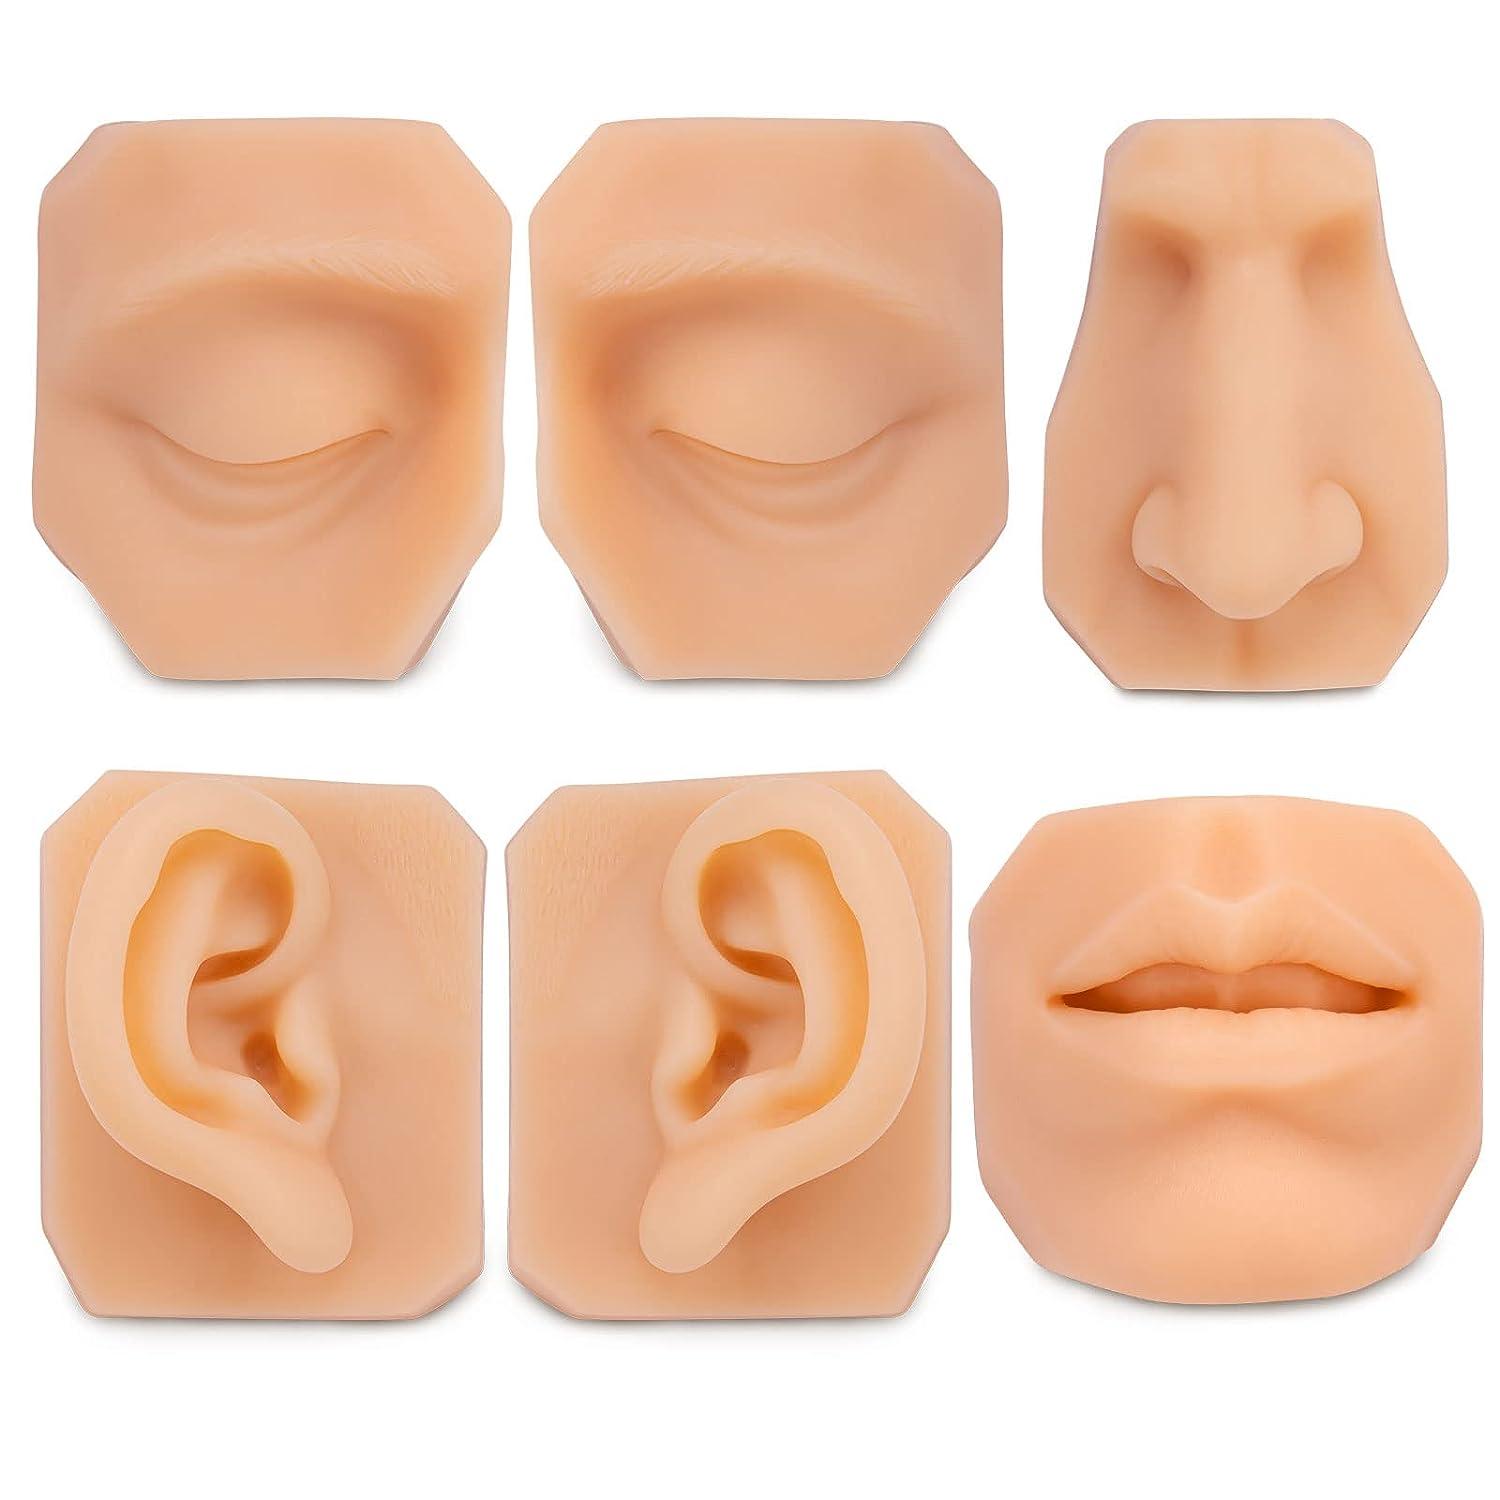 Fake Nose Model,3 Colors Fake Nose Model Silicone Flexible Human Nose Mouth  Model Ultrassist Soft Silicone Nose Model For Practicing Suture Silicone